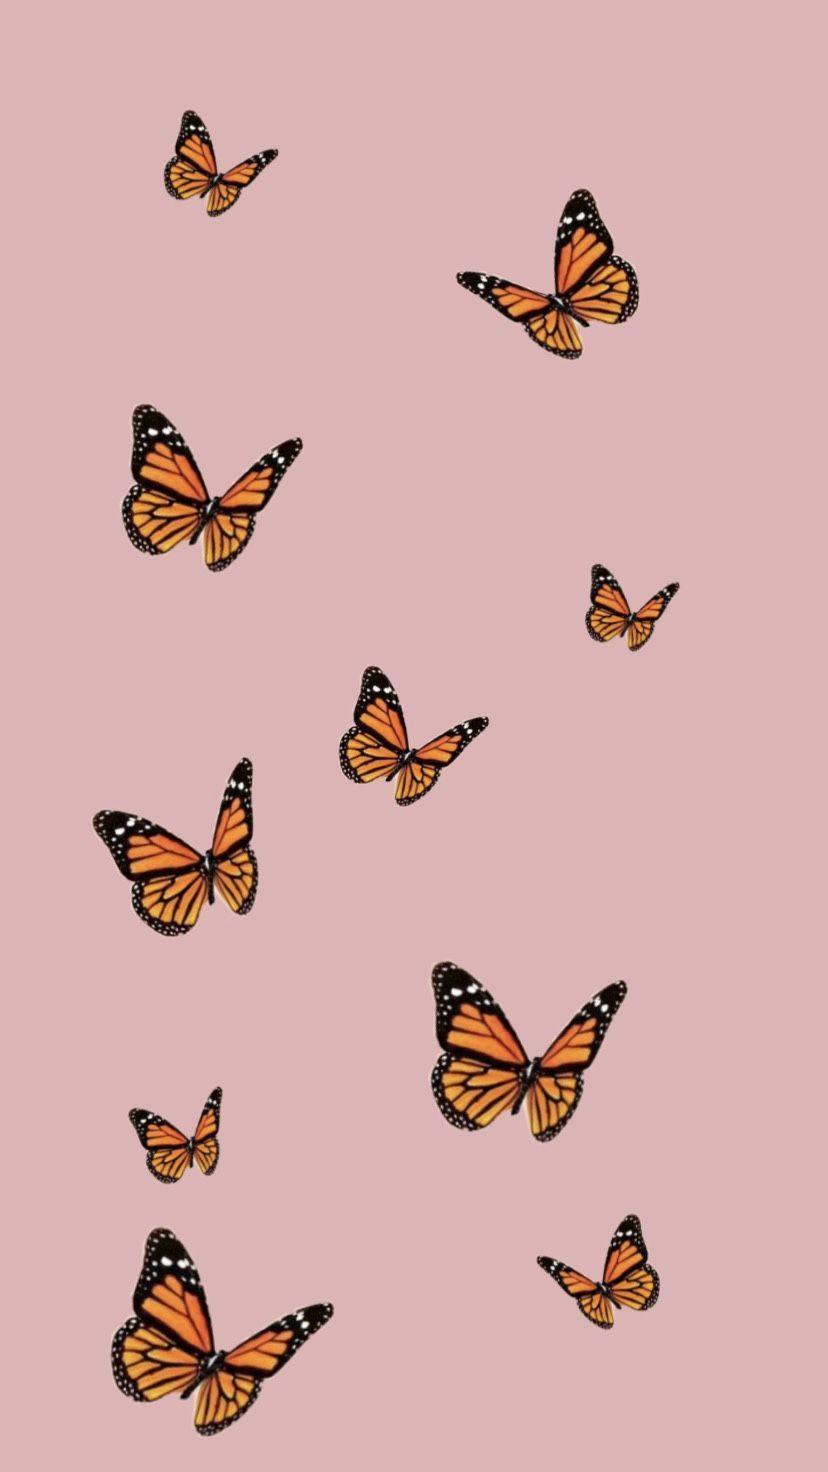 A group of orange butterflies flying in the air - Butterfly